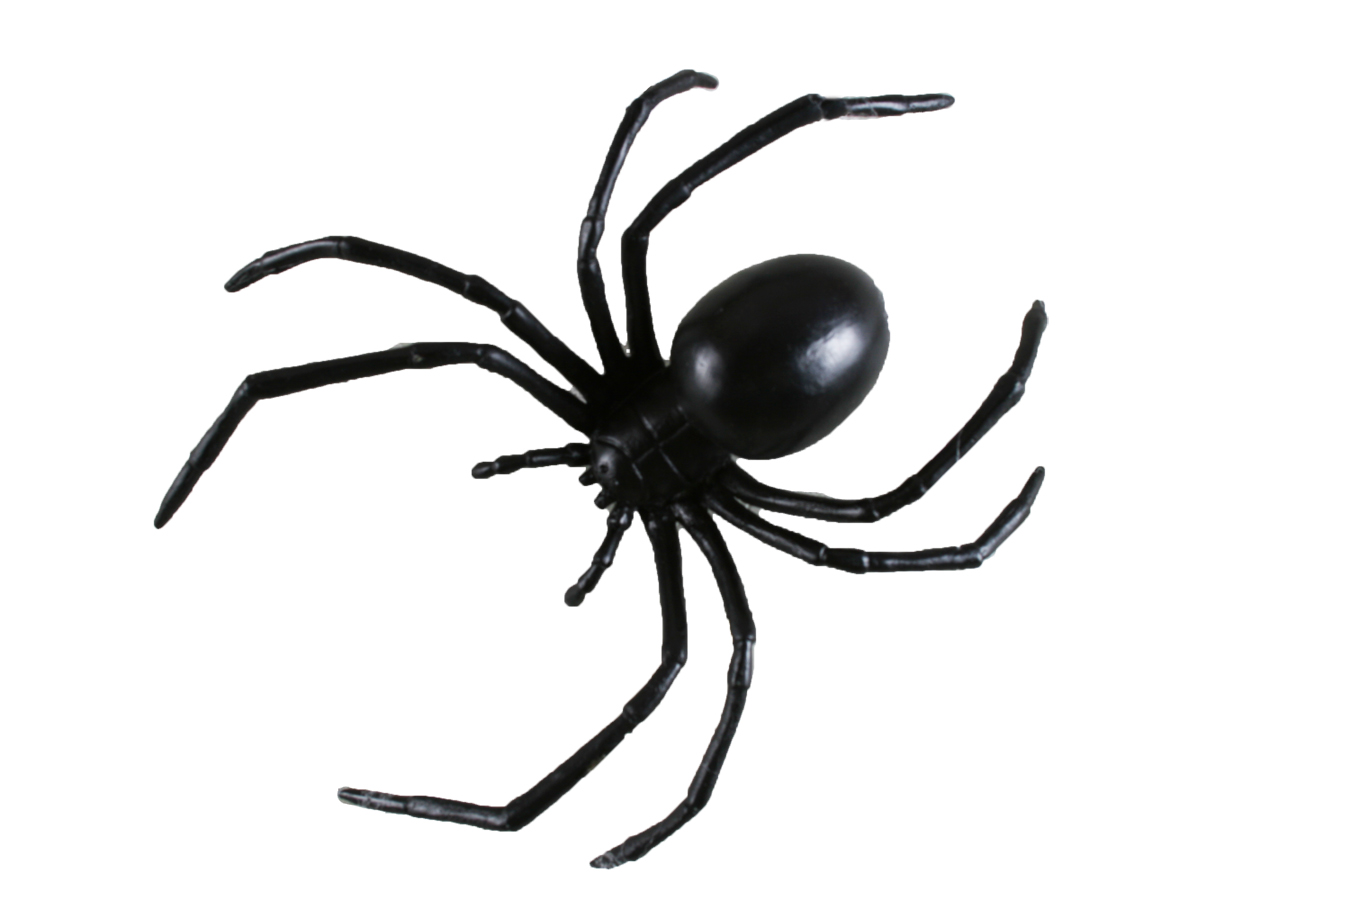 Free Animated Spider Pictures, Download Free Animated Spider Pictures